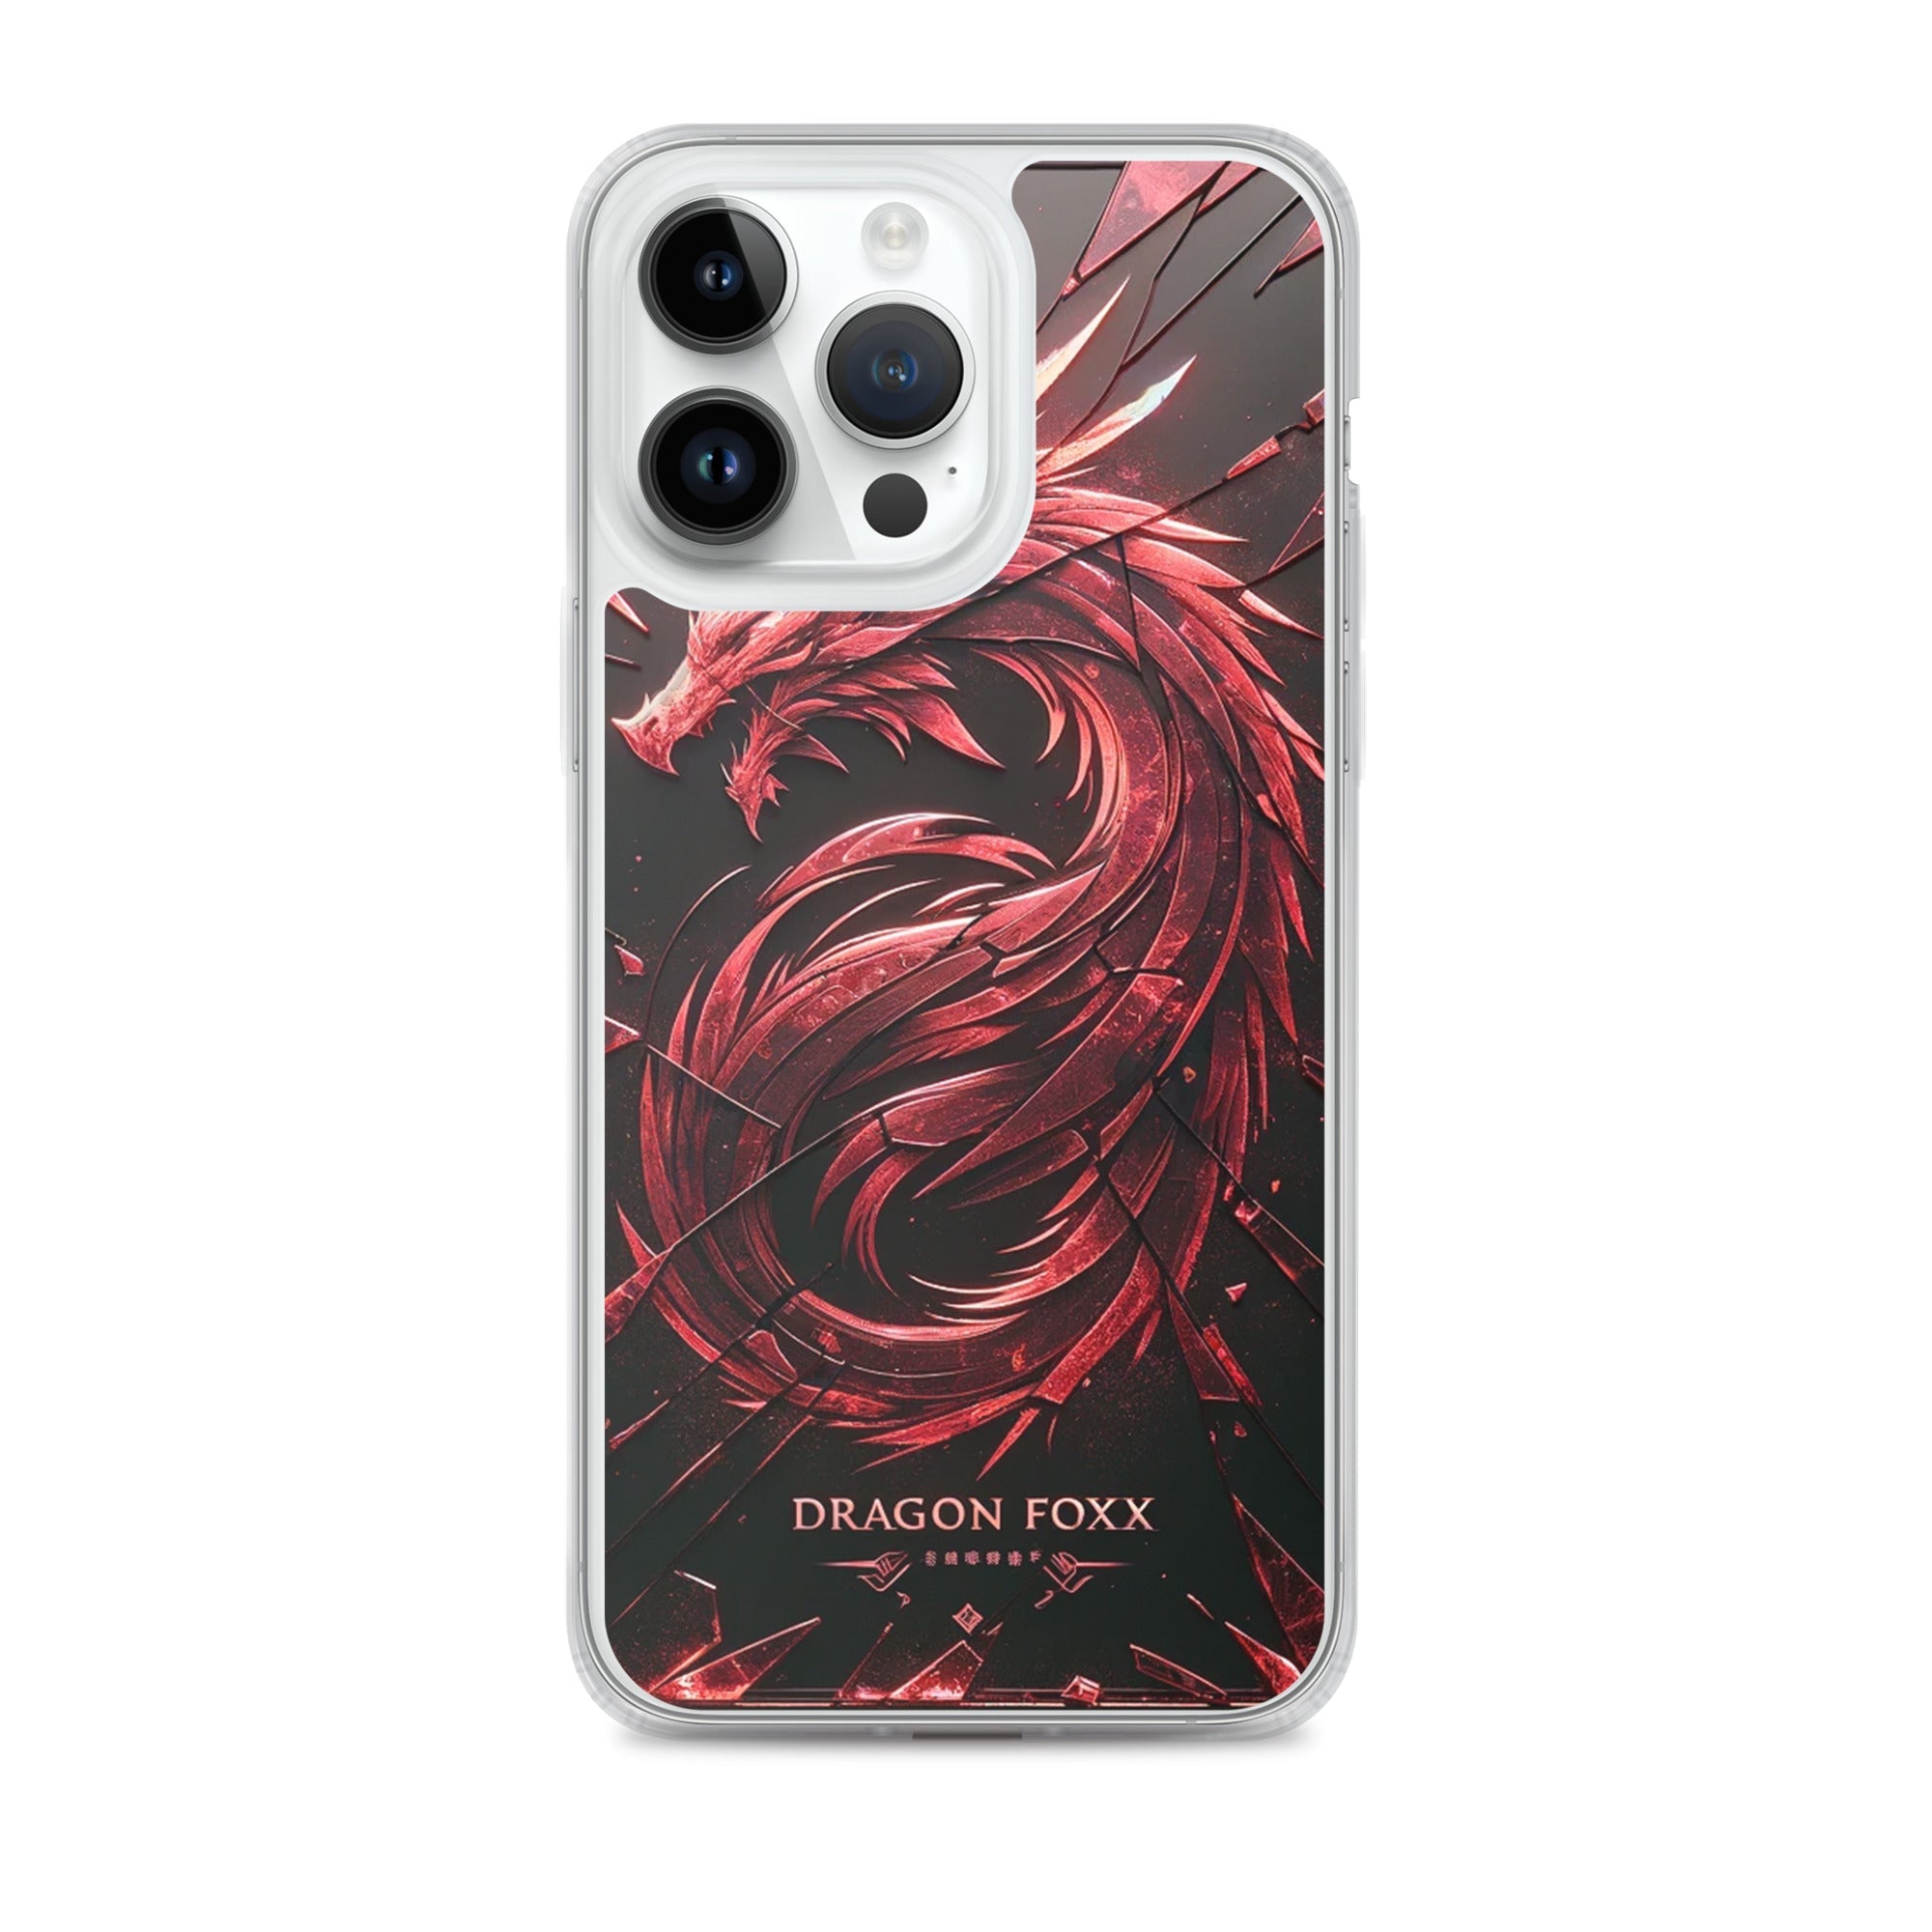 DRAGON FOXX™ Red Dragon Phone Case for iPhone® - Phone Case for iPhone® - DRAGON FOXX™ - DRAGON FOXX™ Red Dragon Phone Case for iPhone® - 7805351_16243 - iPhone 14 Pro Max - Red/Black/Clear - Accessories - Dragon Foxx™ - DRAGON FOXX™ Phone Case for iPhone®